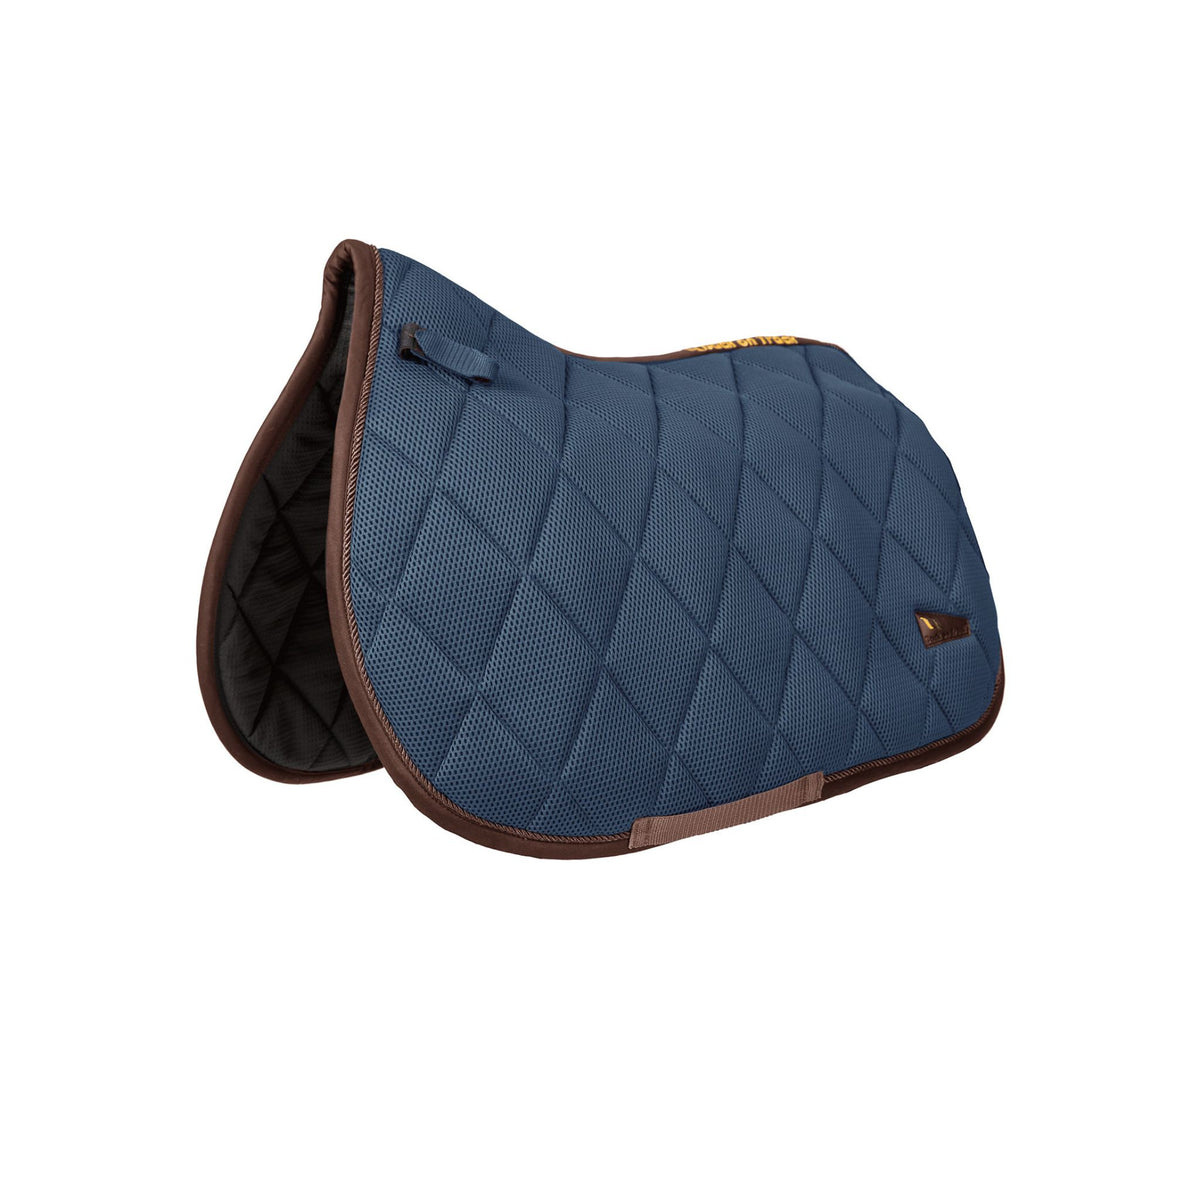 Navy blue saddle pad with brown ascents and Velcro attachments.